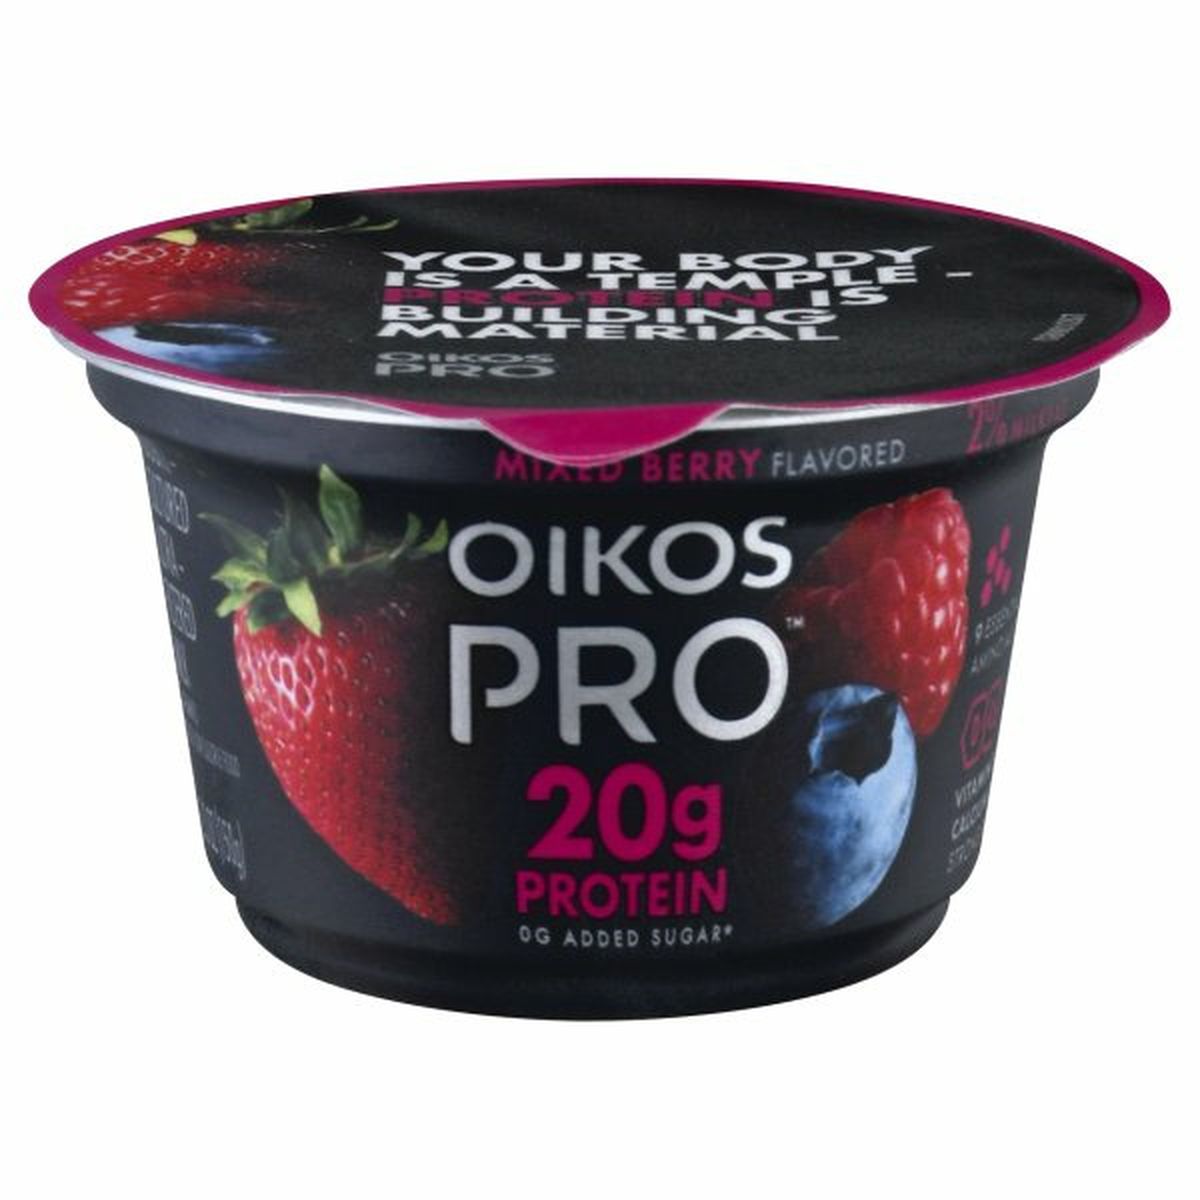 Calories in Oikos Pro Yogurt, 2% Milkfat, Mixed Berry Flavored, Cultured Ultra-Filtered Milk